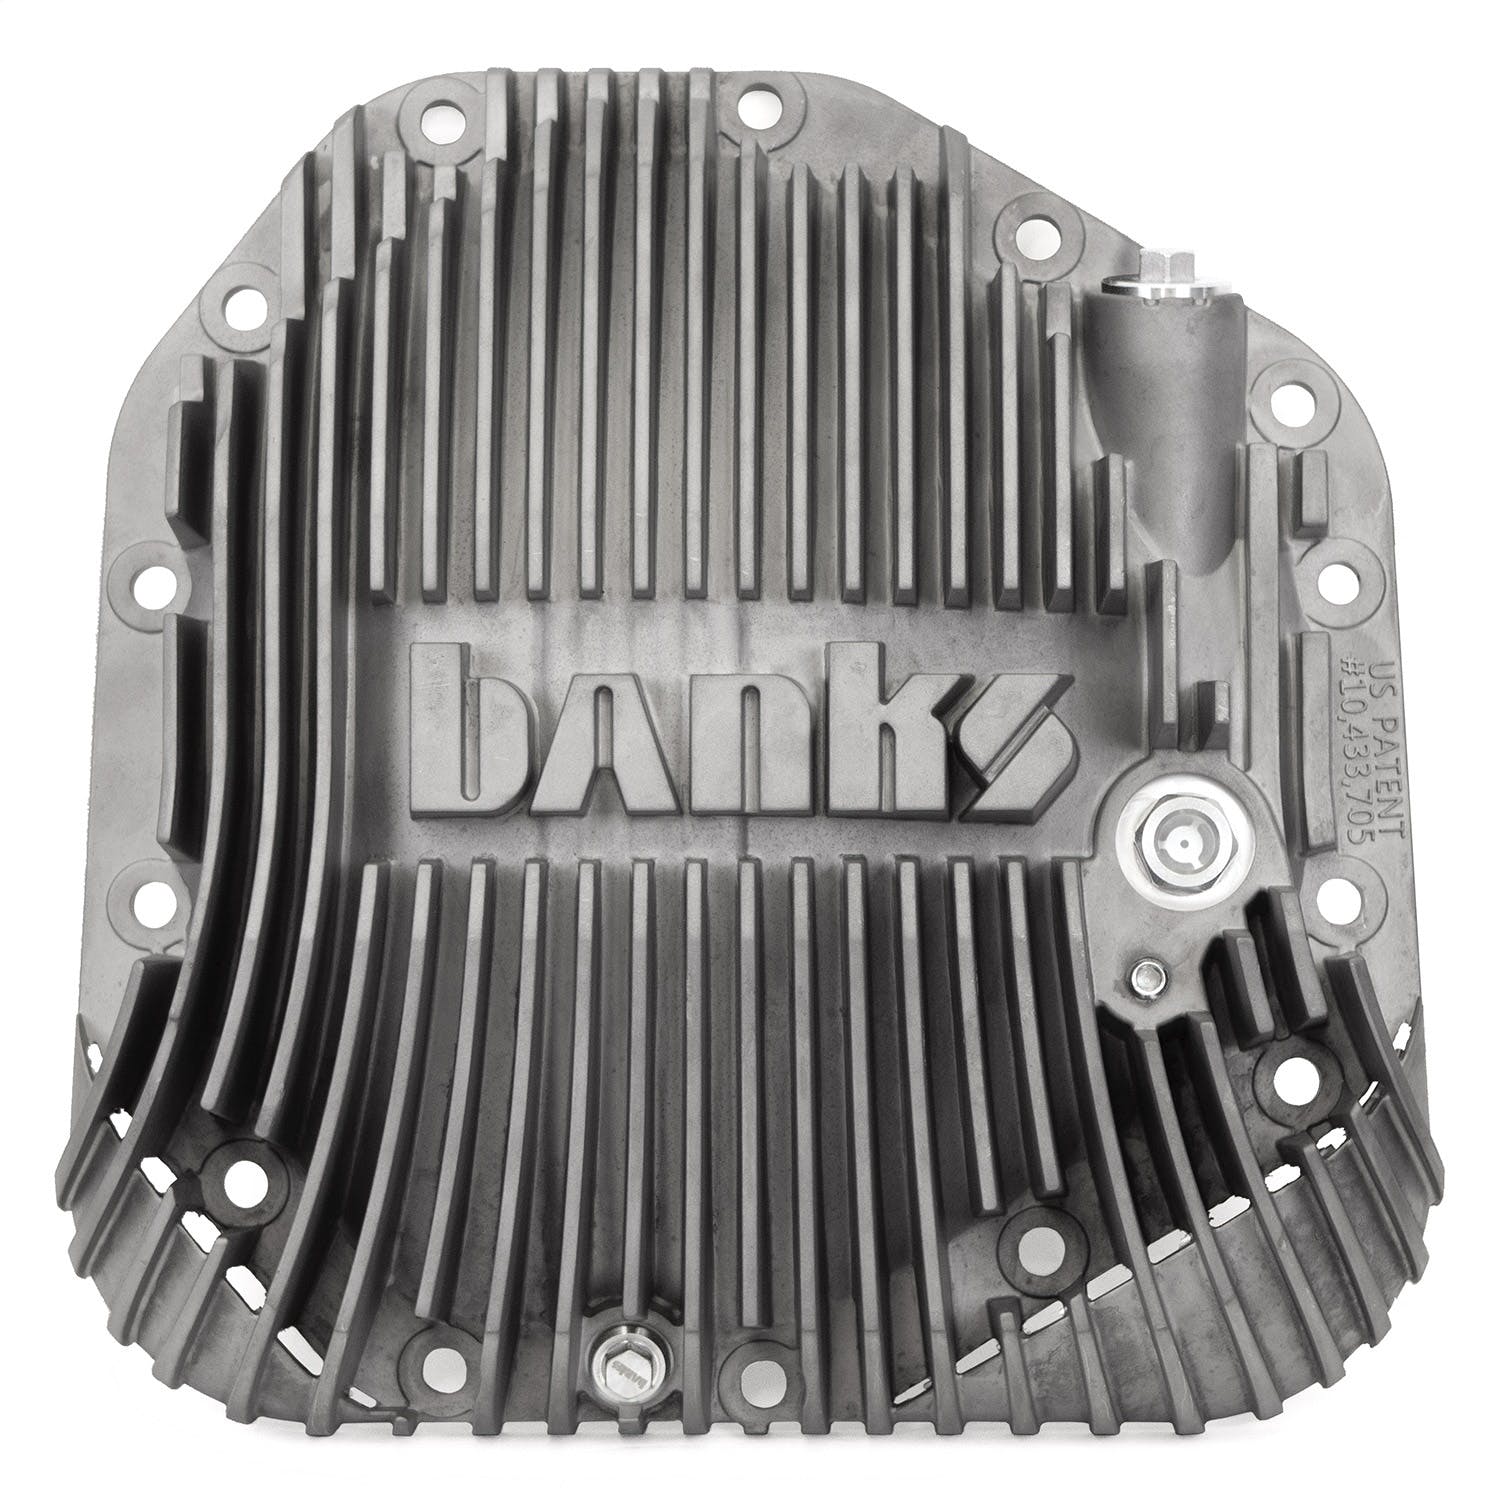 Banks Power 19281 Ram-Air® Differential Cover Kit